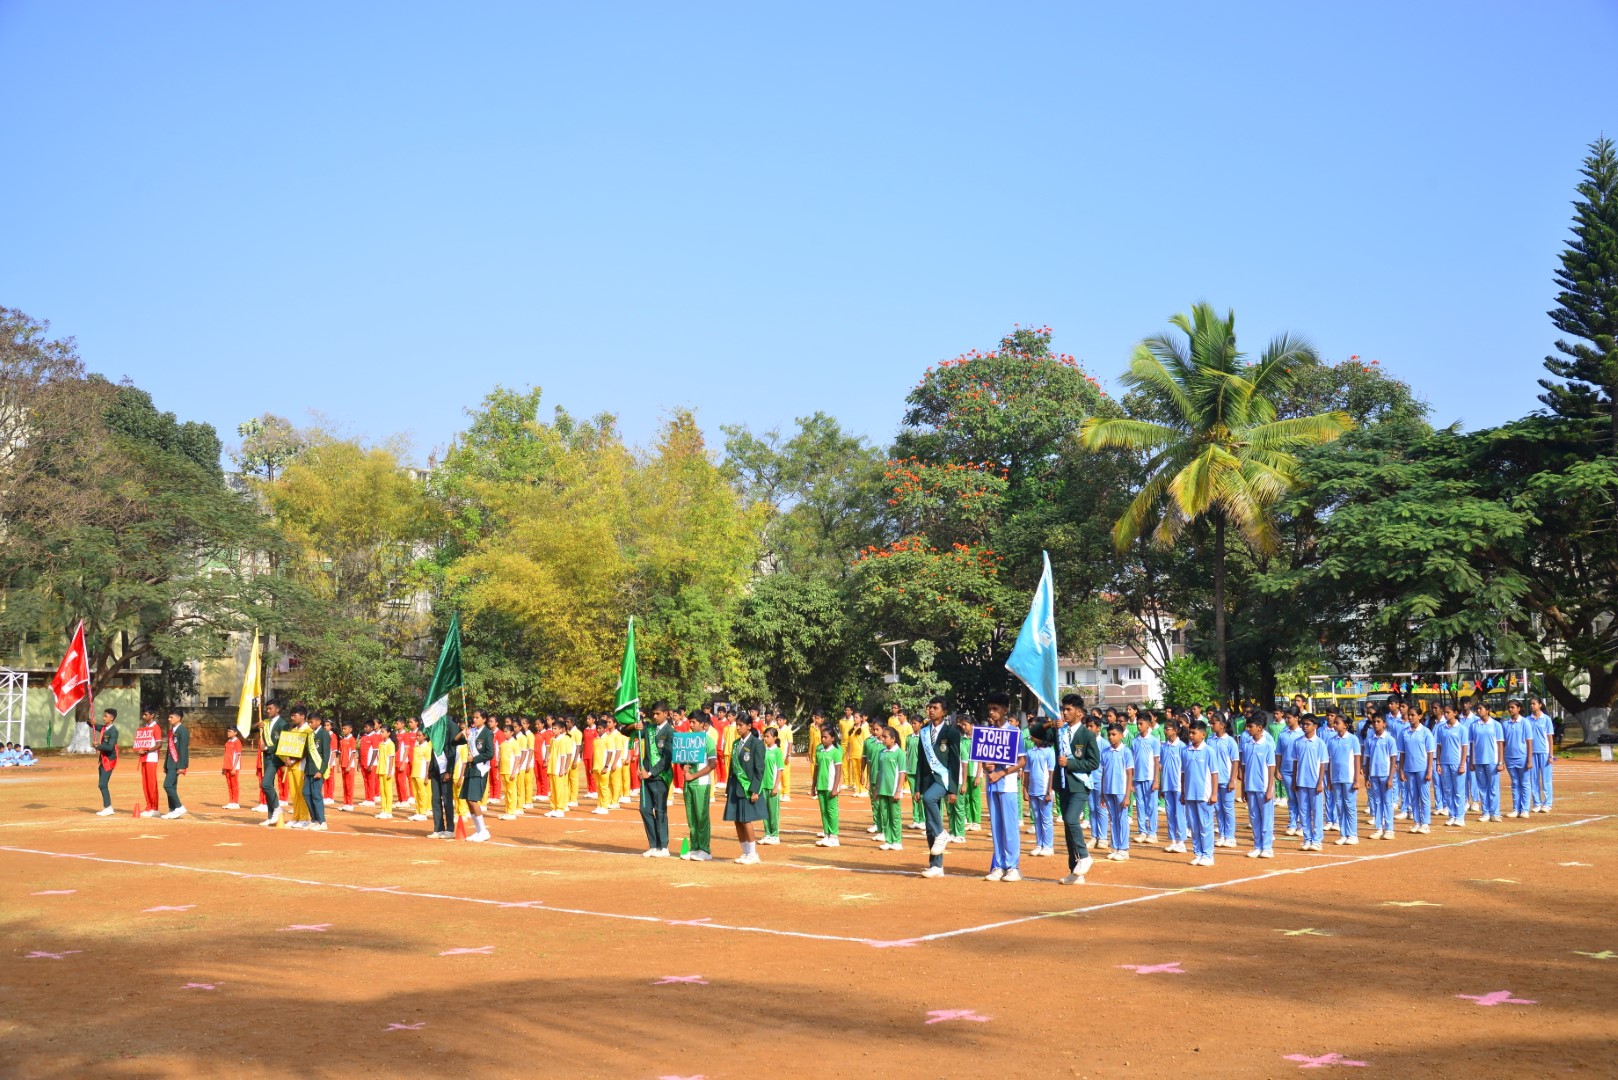 A group of students in sports uniforms marching in formation during Bethesda International School's Sports Day event, with flags waving in the background